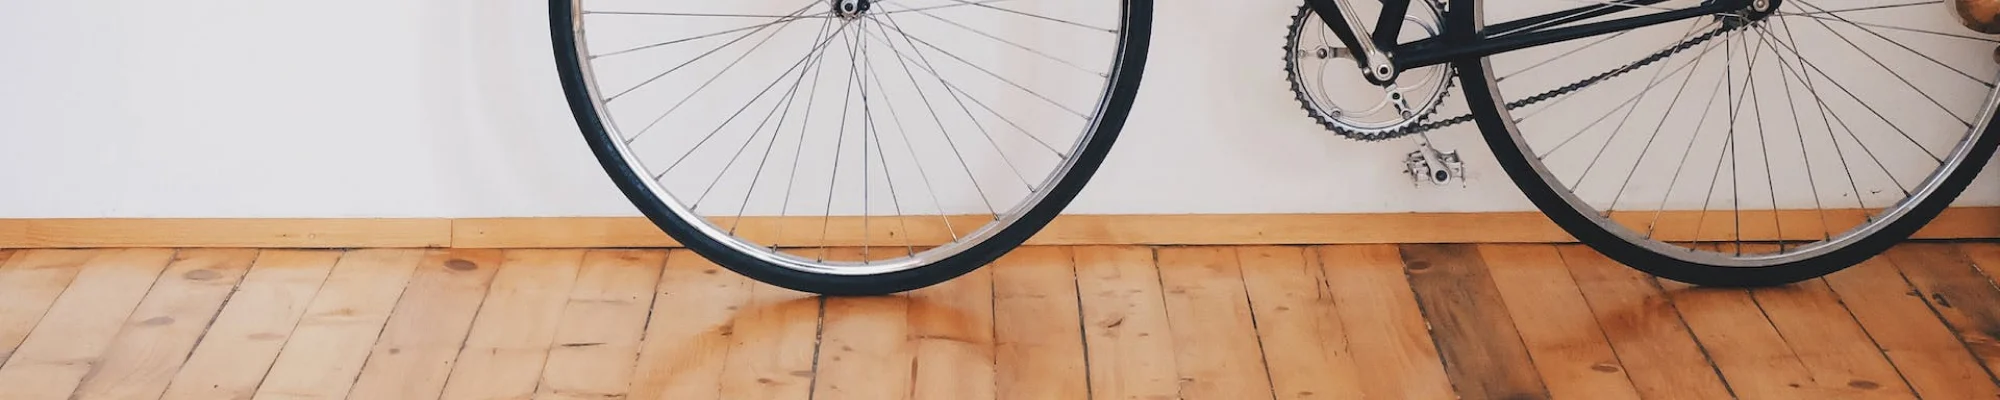 bike leaning against the wall in a room with hardwood flooring